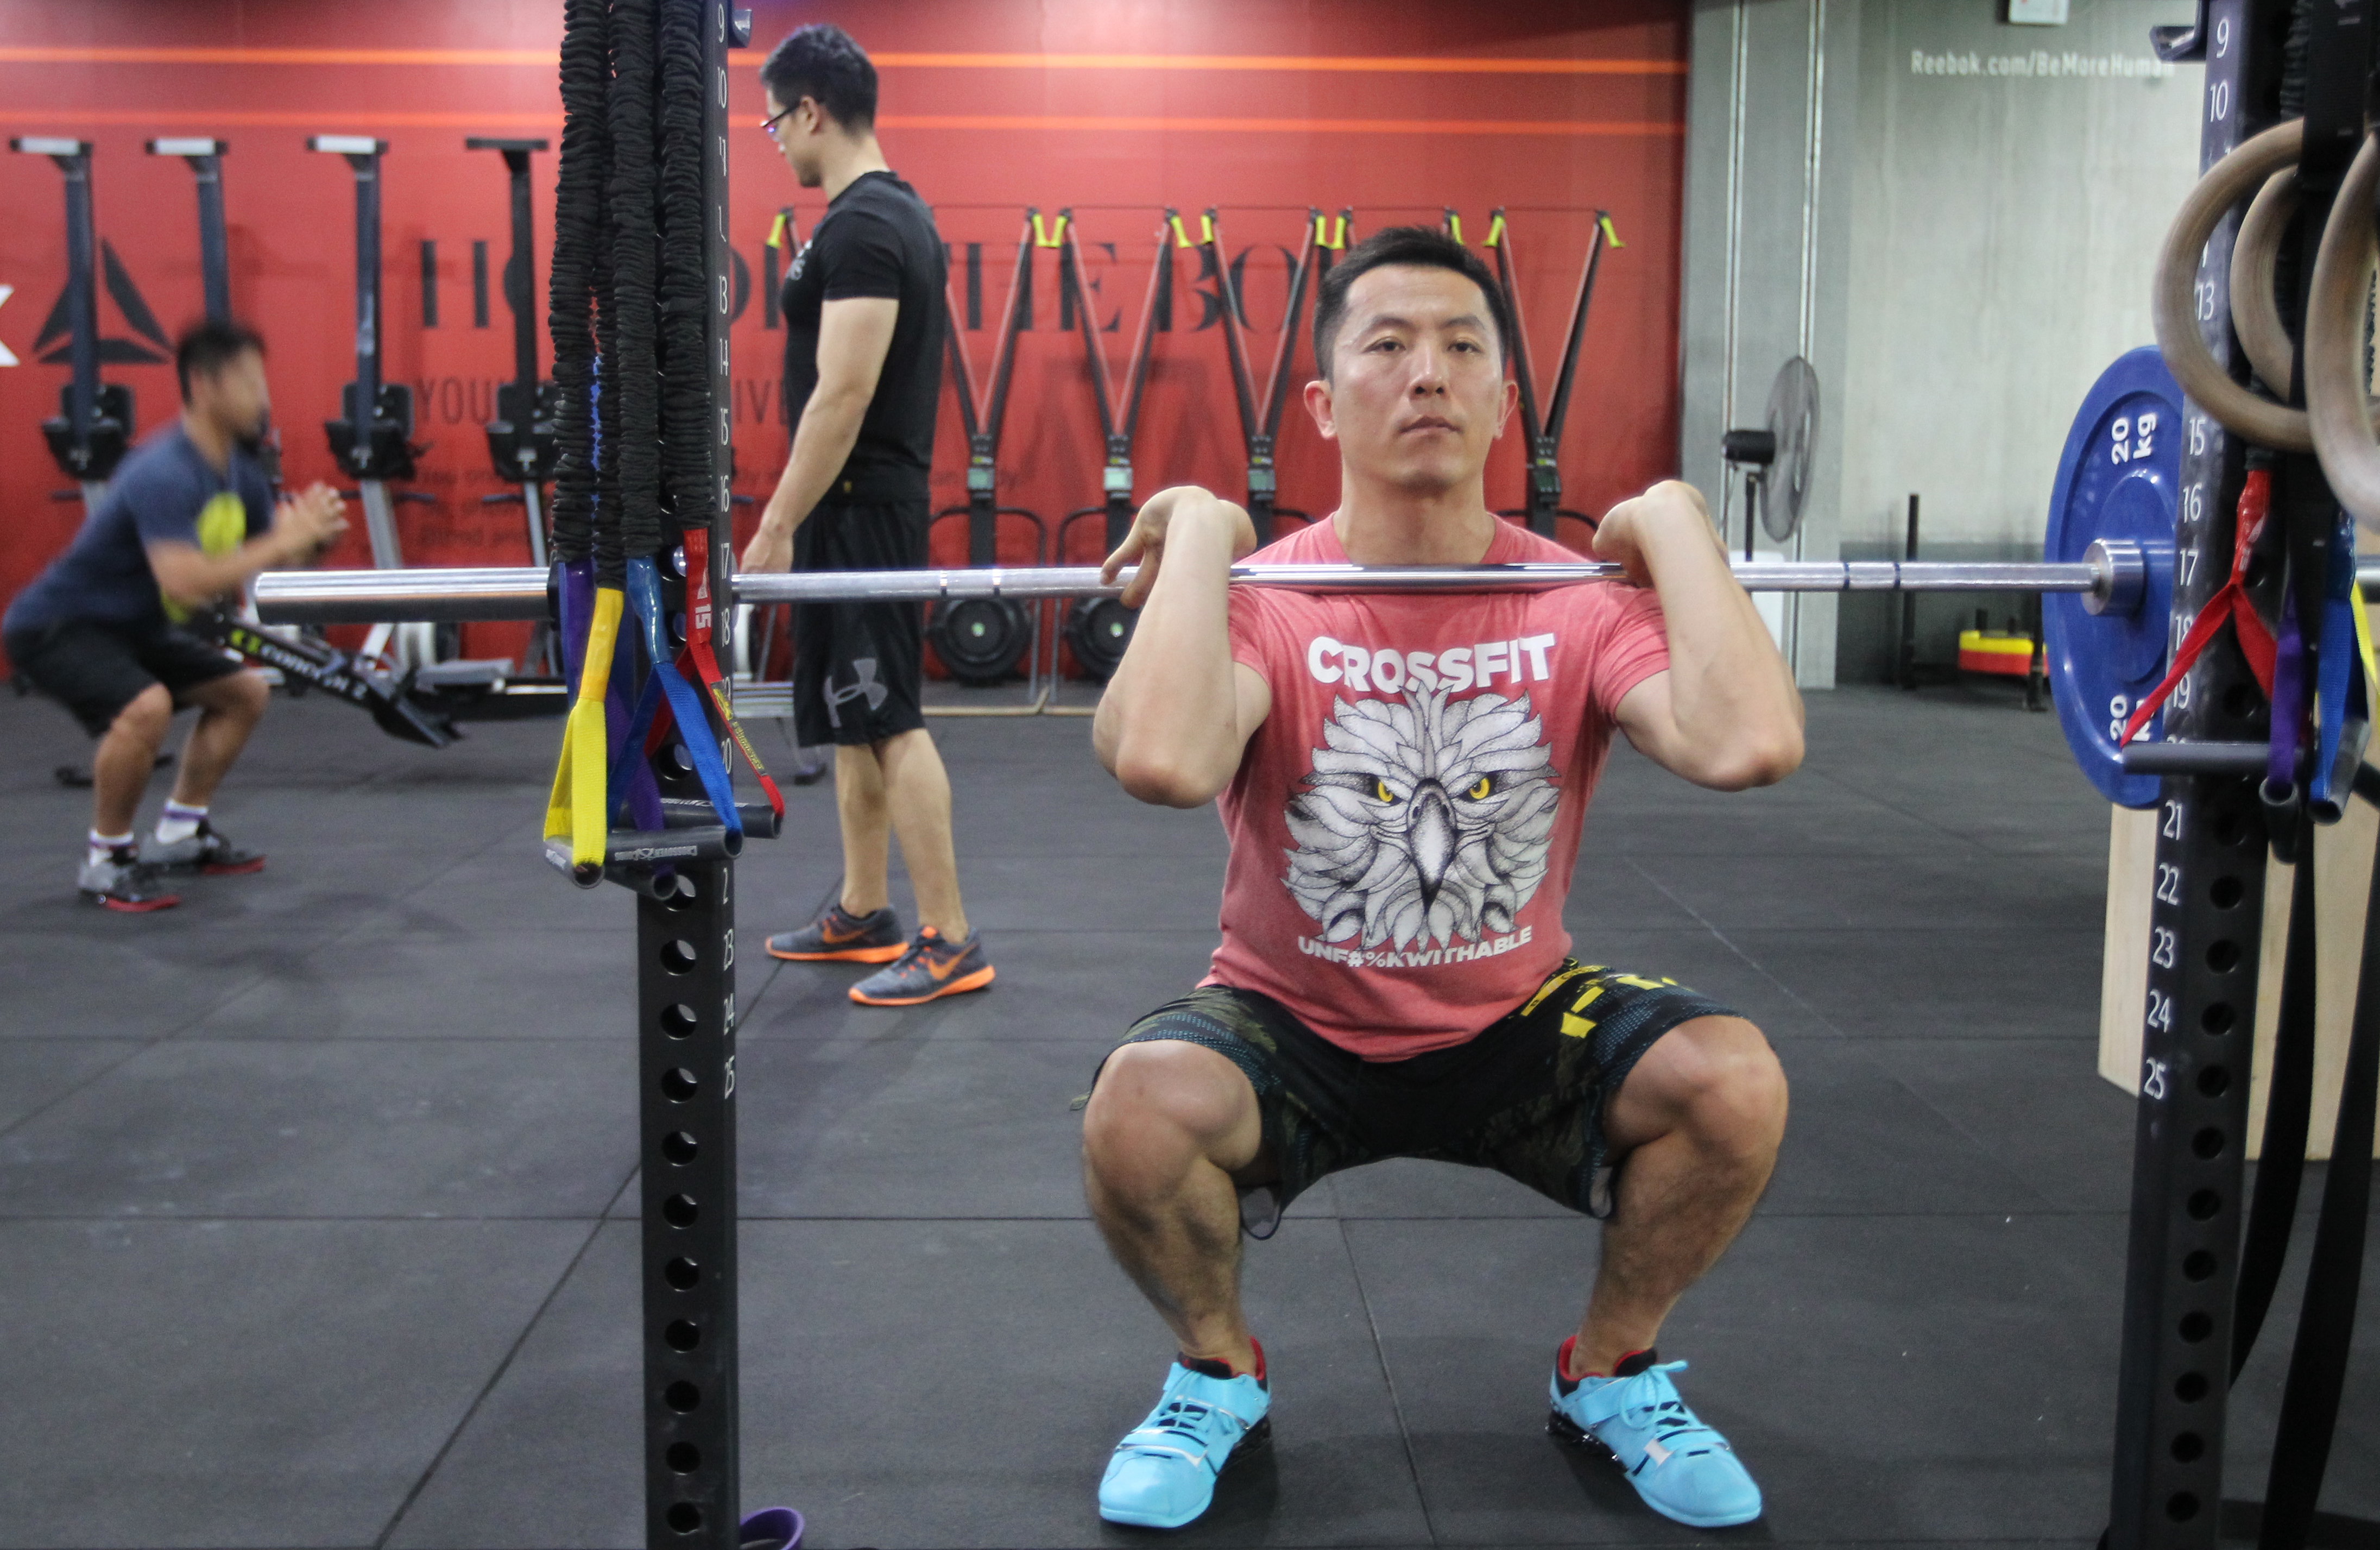 China's 'fitness fever' as women pursue firm abs (3) - People's